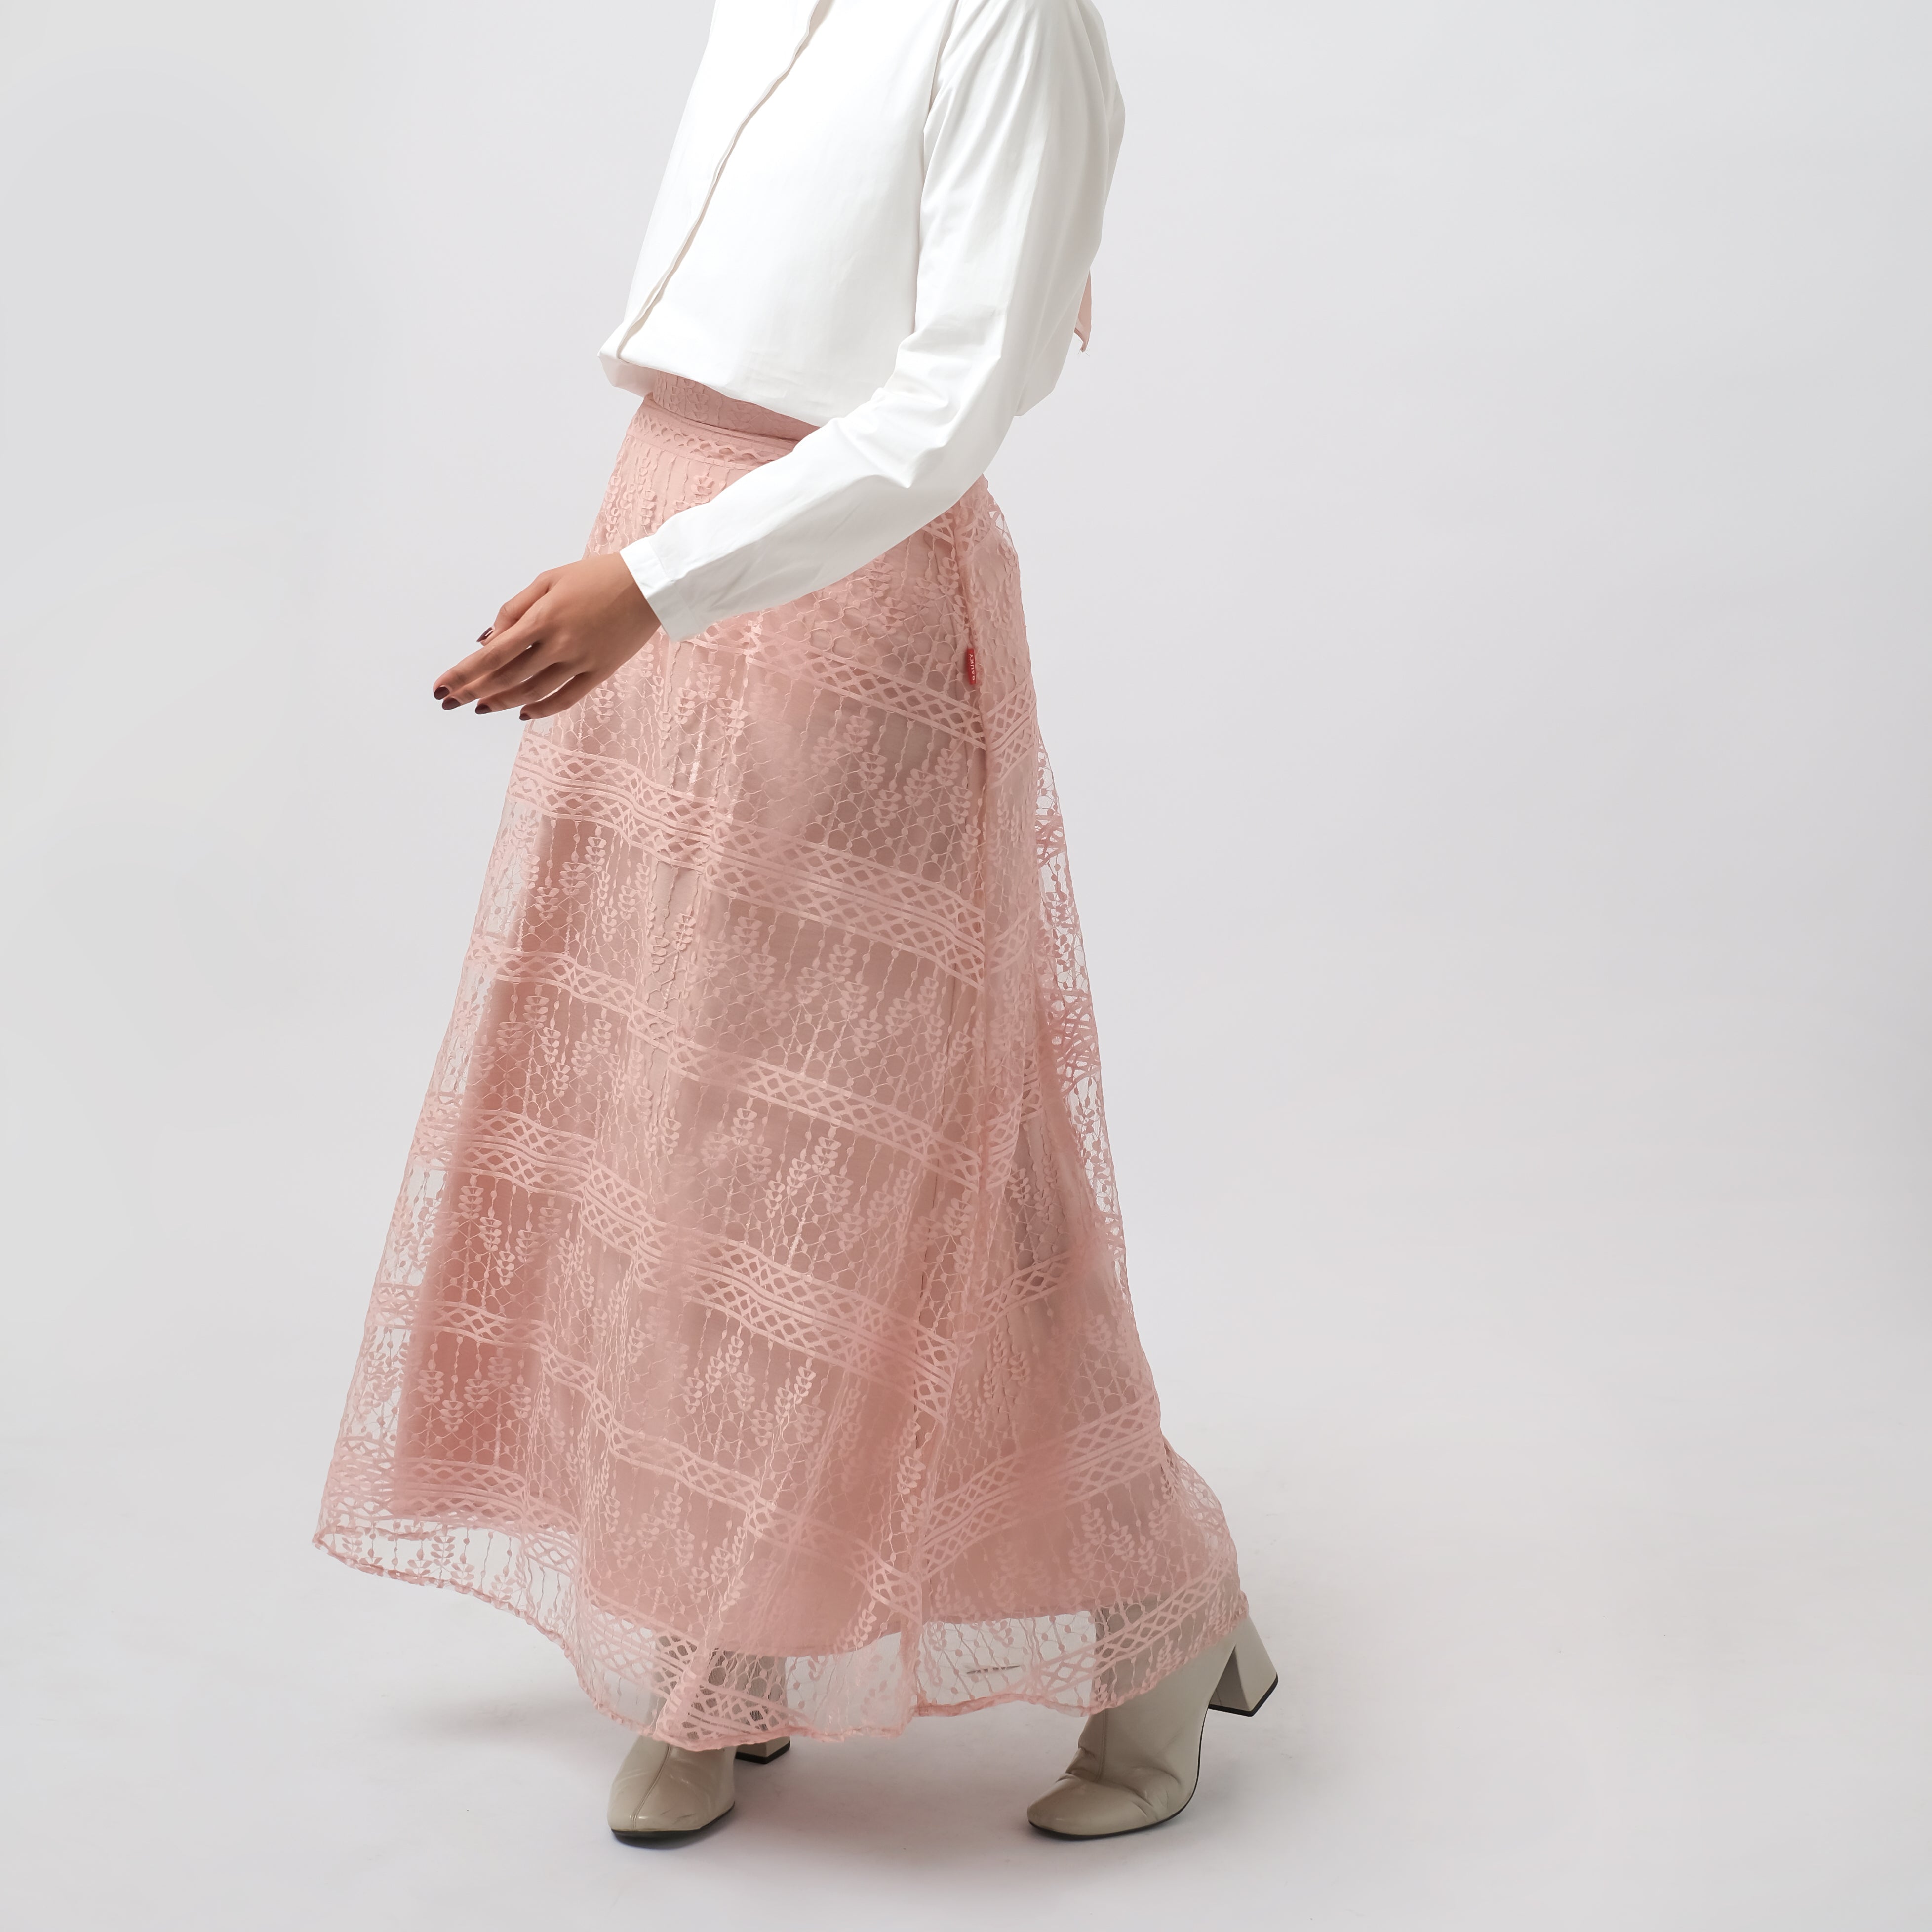 Skirt Lace Tulle